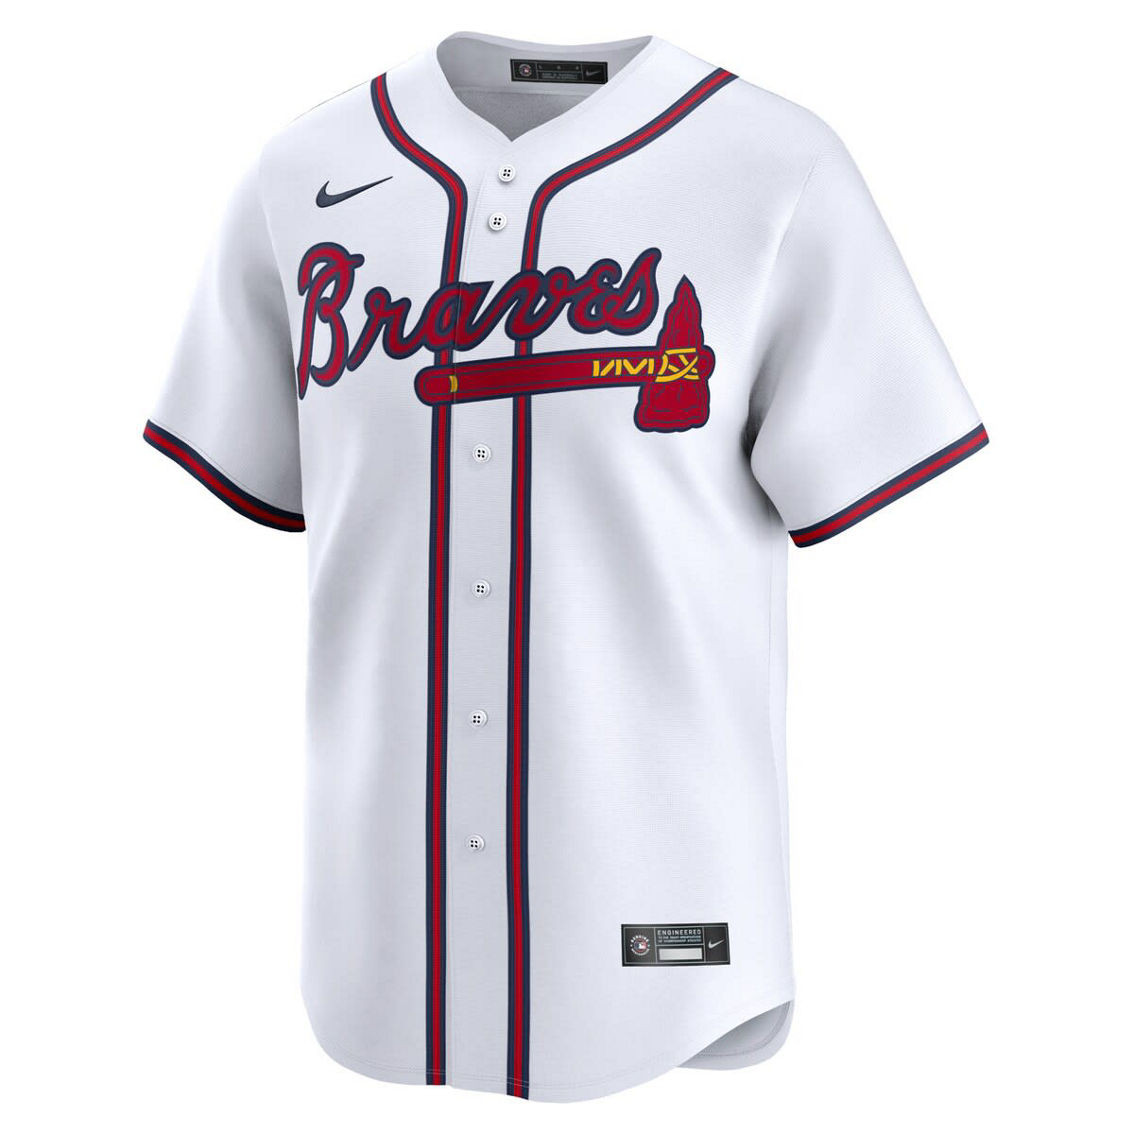 Nike Men's Marcell Ozuna White Atlanta Braves Home Limited Player Jersey - Image 3 of 4